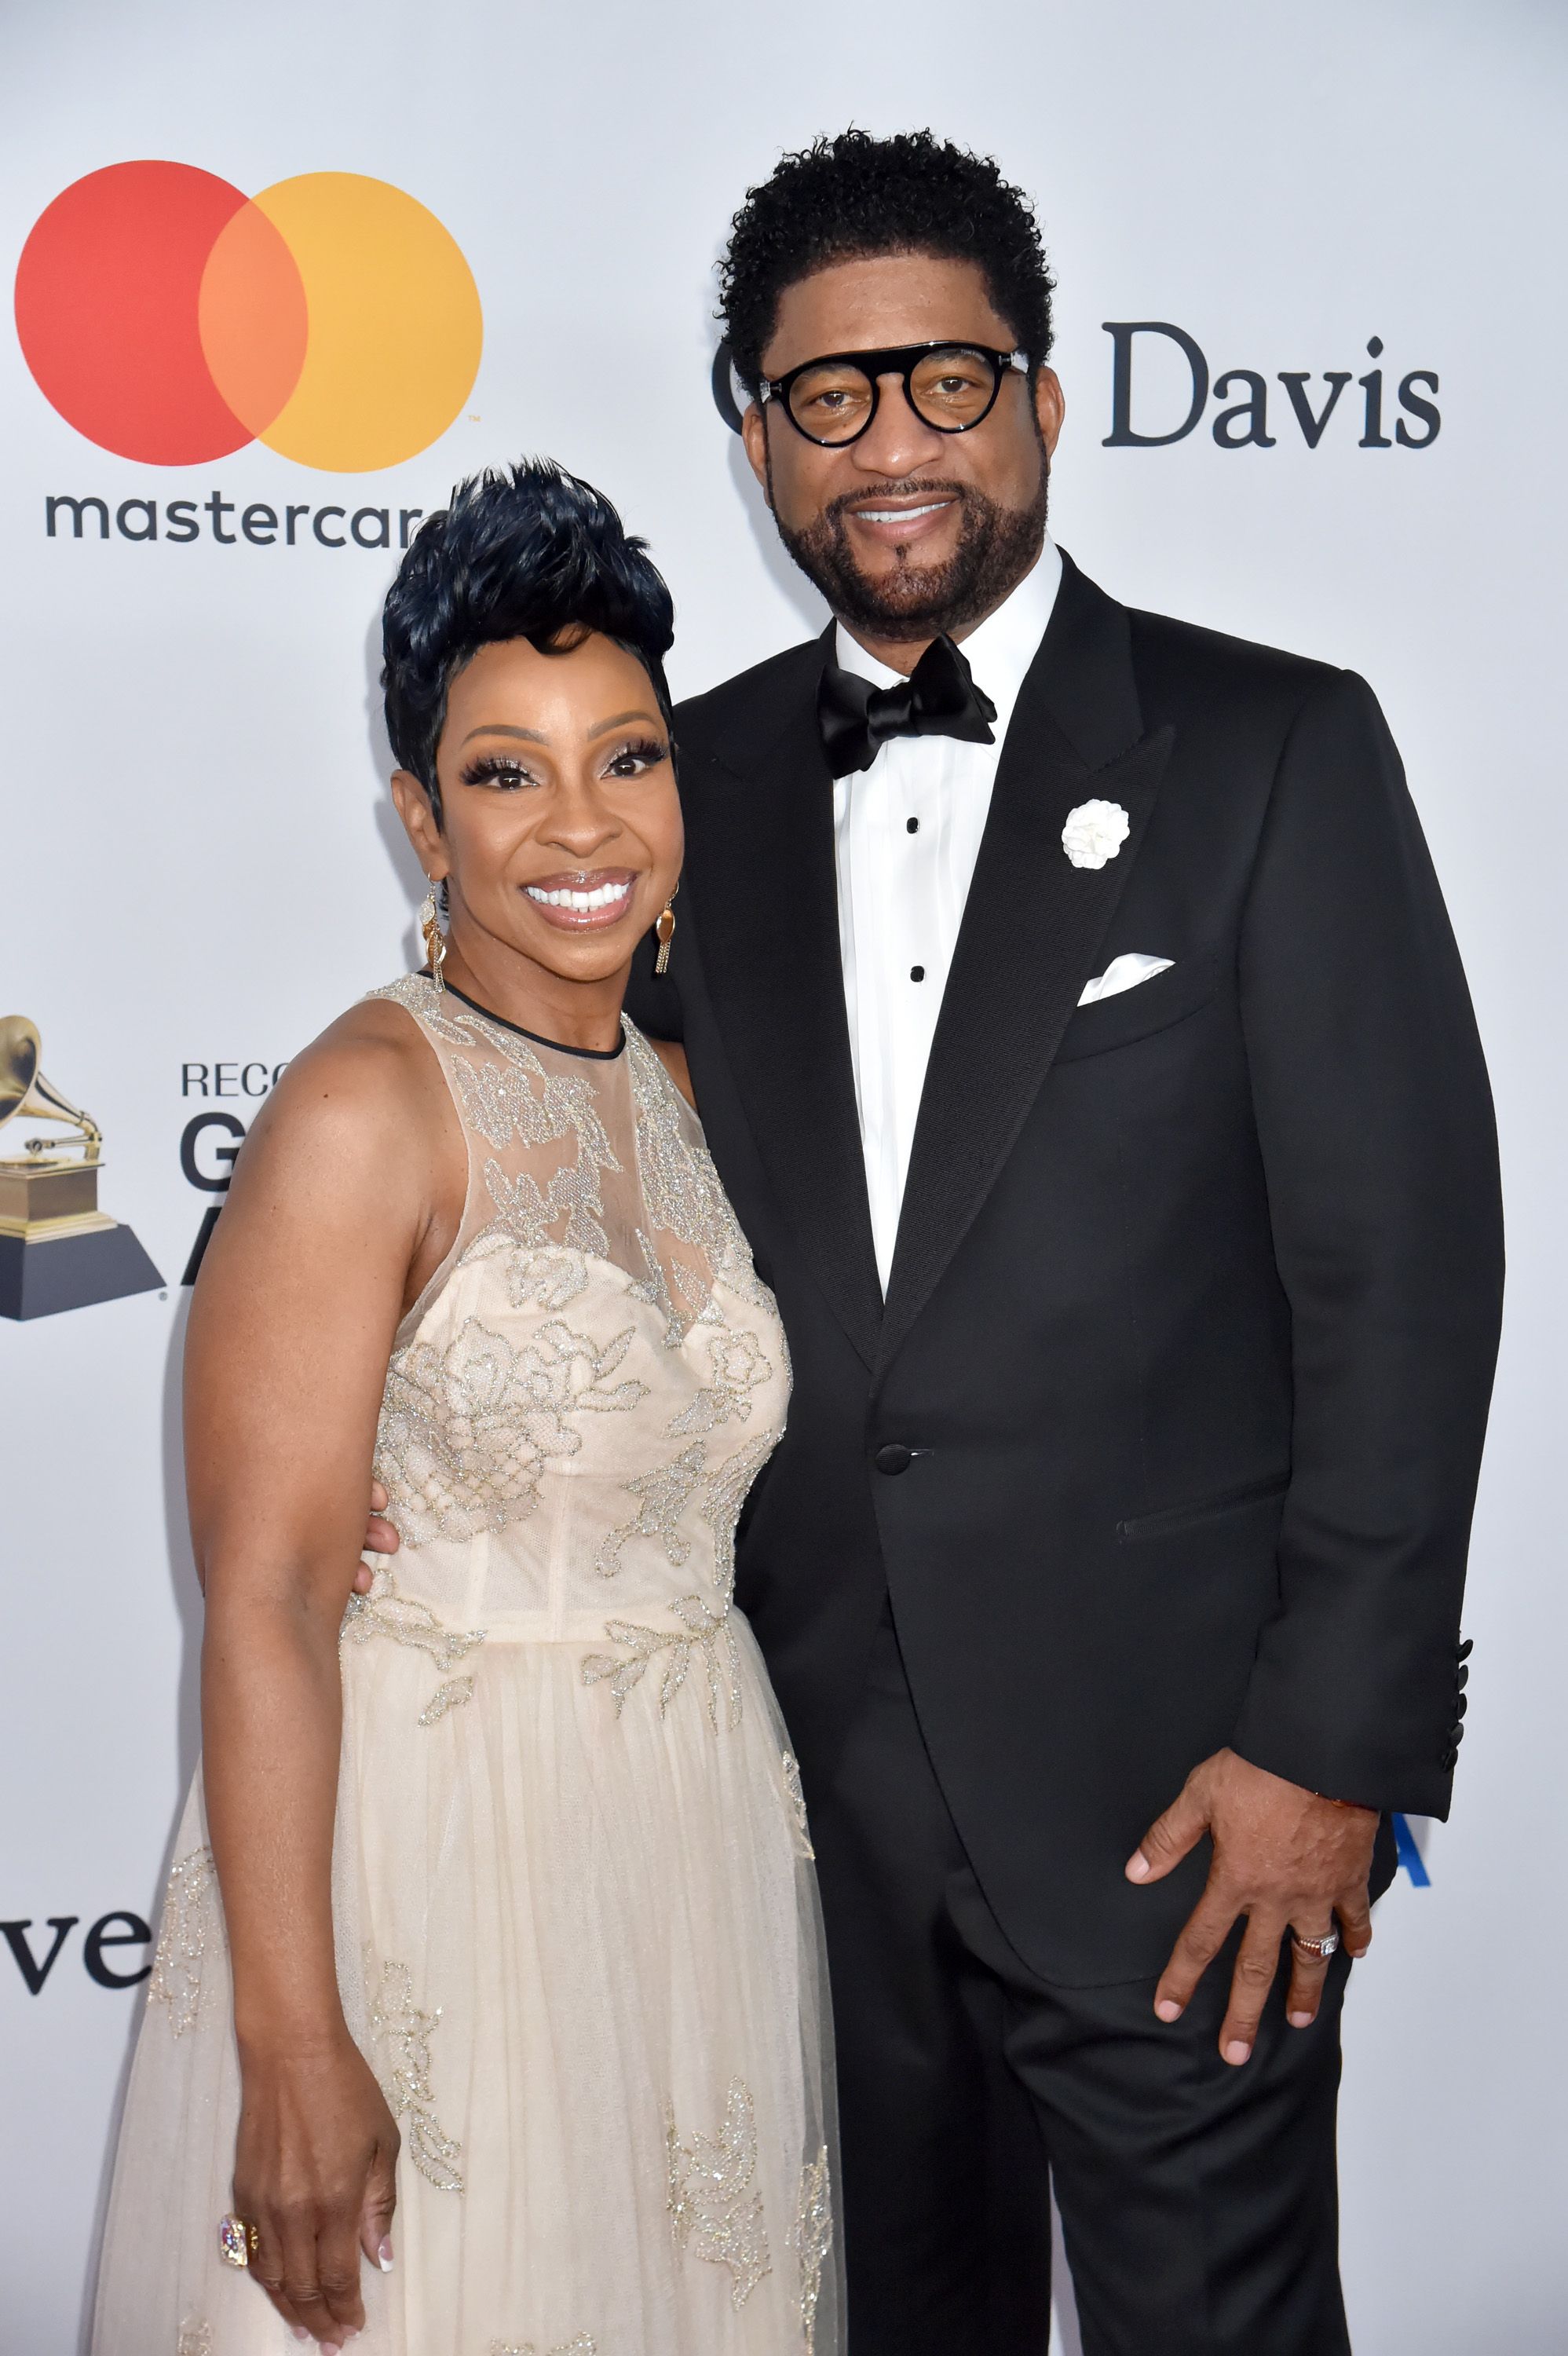 Gladys Knight and William McDowell at the Clive Davis and Recording Academy Pre-GRAMMY Gala and GRAMMY Salute on January 27, 2018 in New York City. | Source: Getty Images